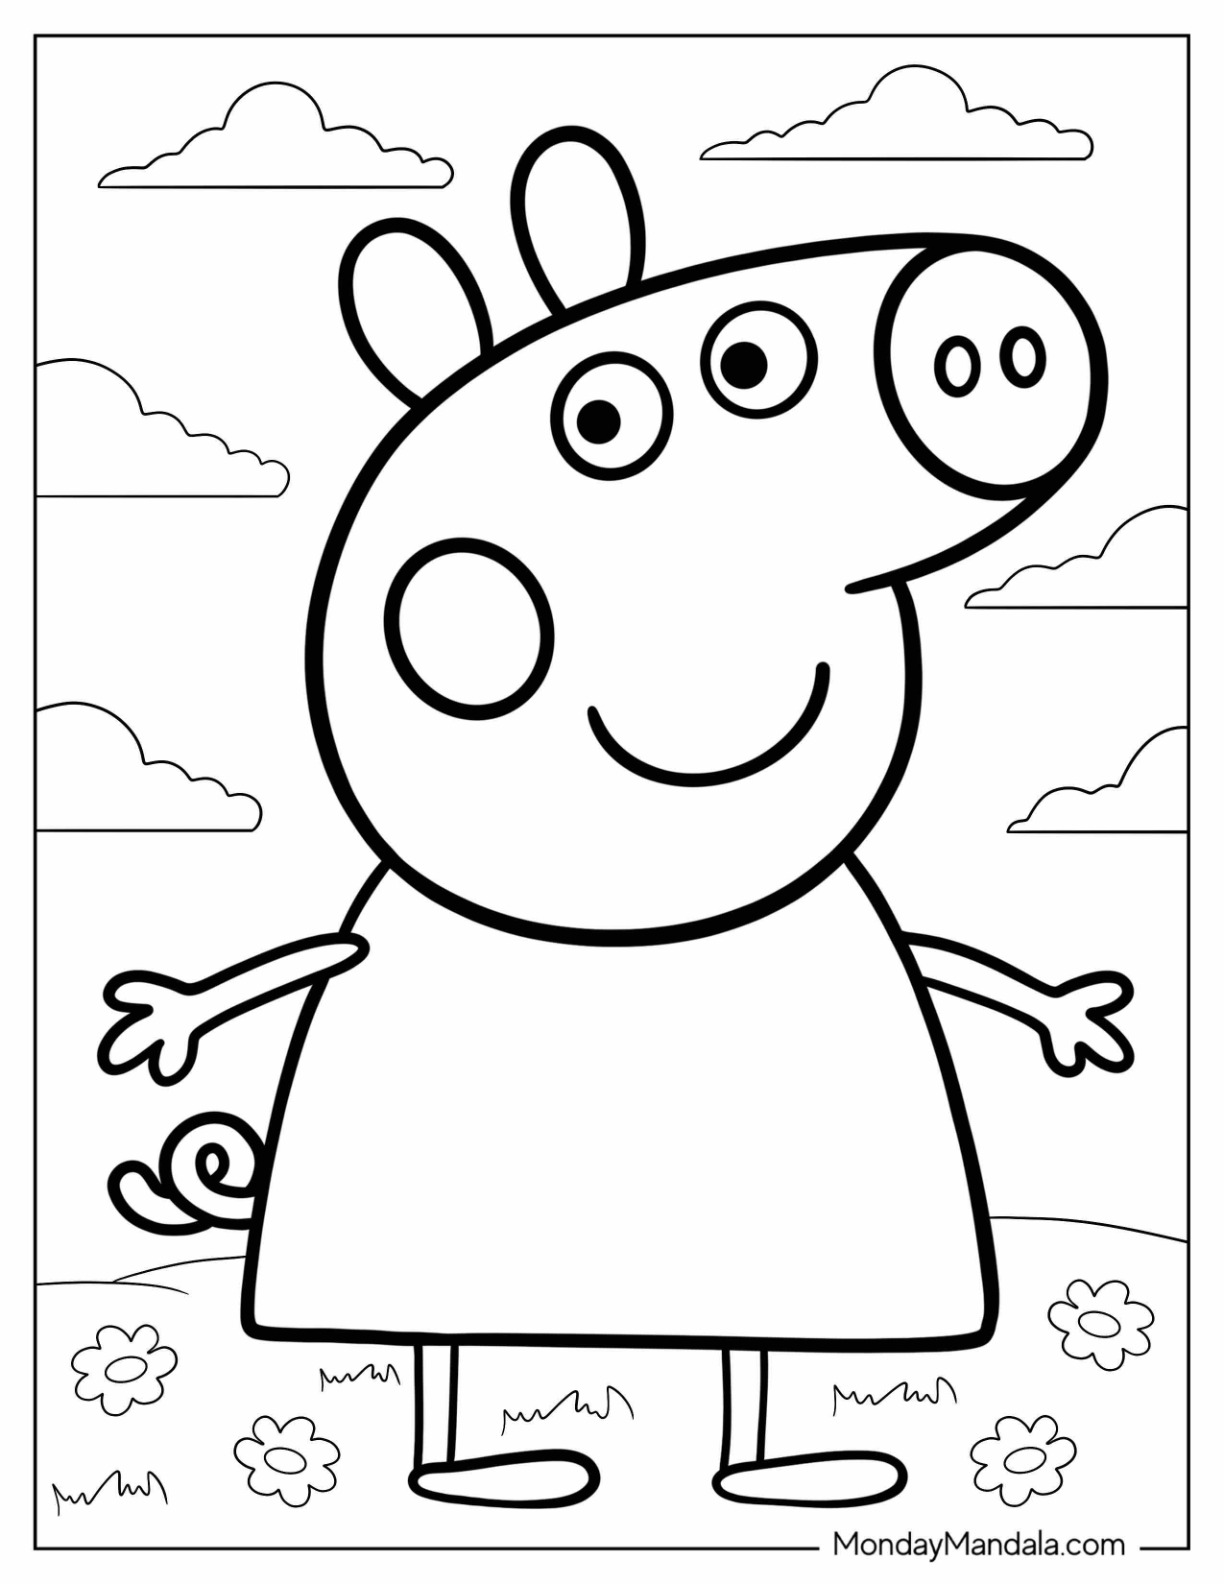 Cartoon coloring pages free pdf printables